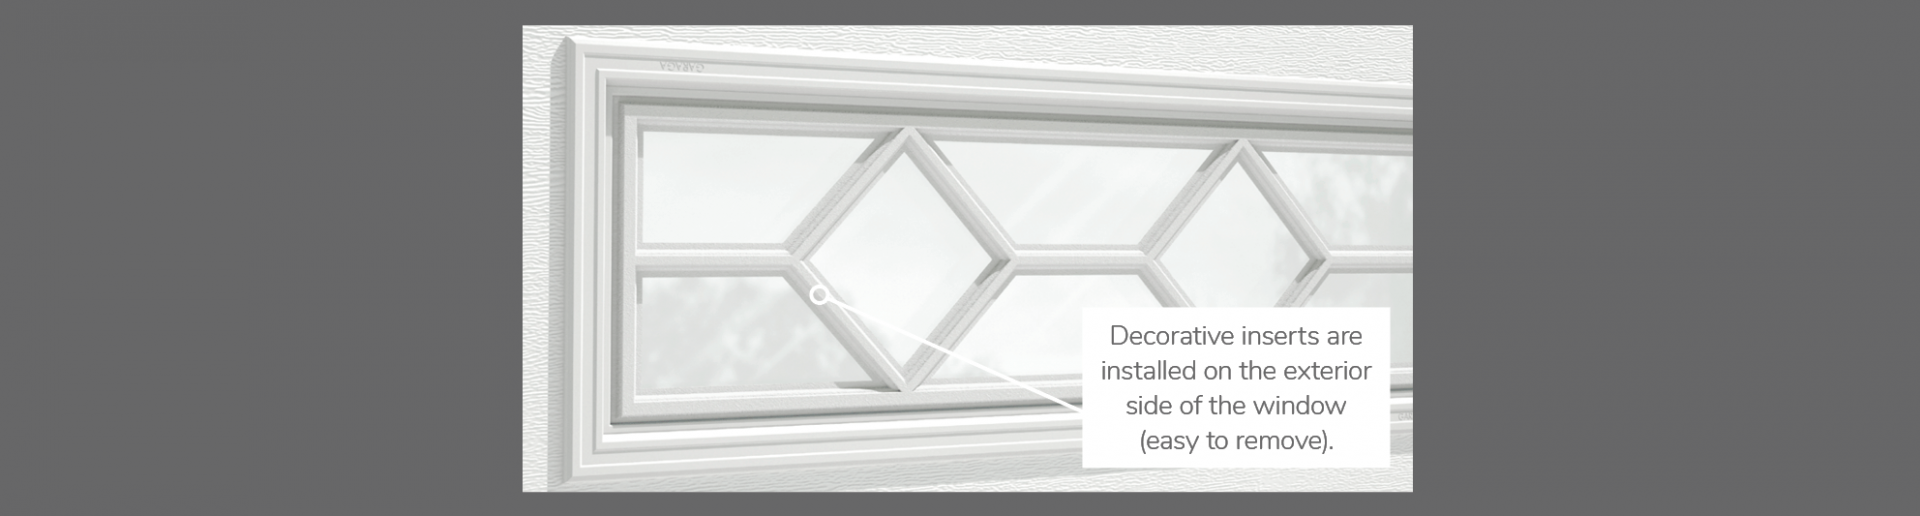 Waterton Decorative Insert, 40" x 13", available for door R-16